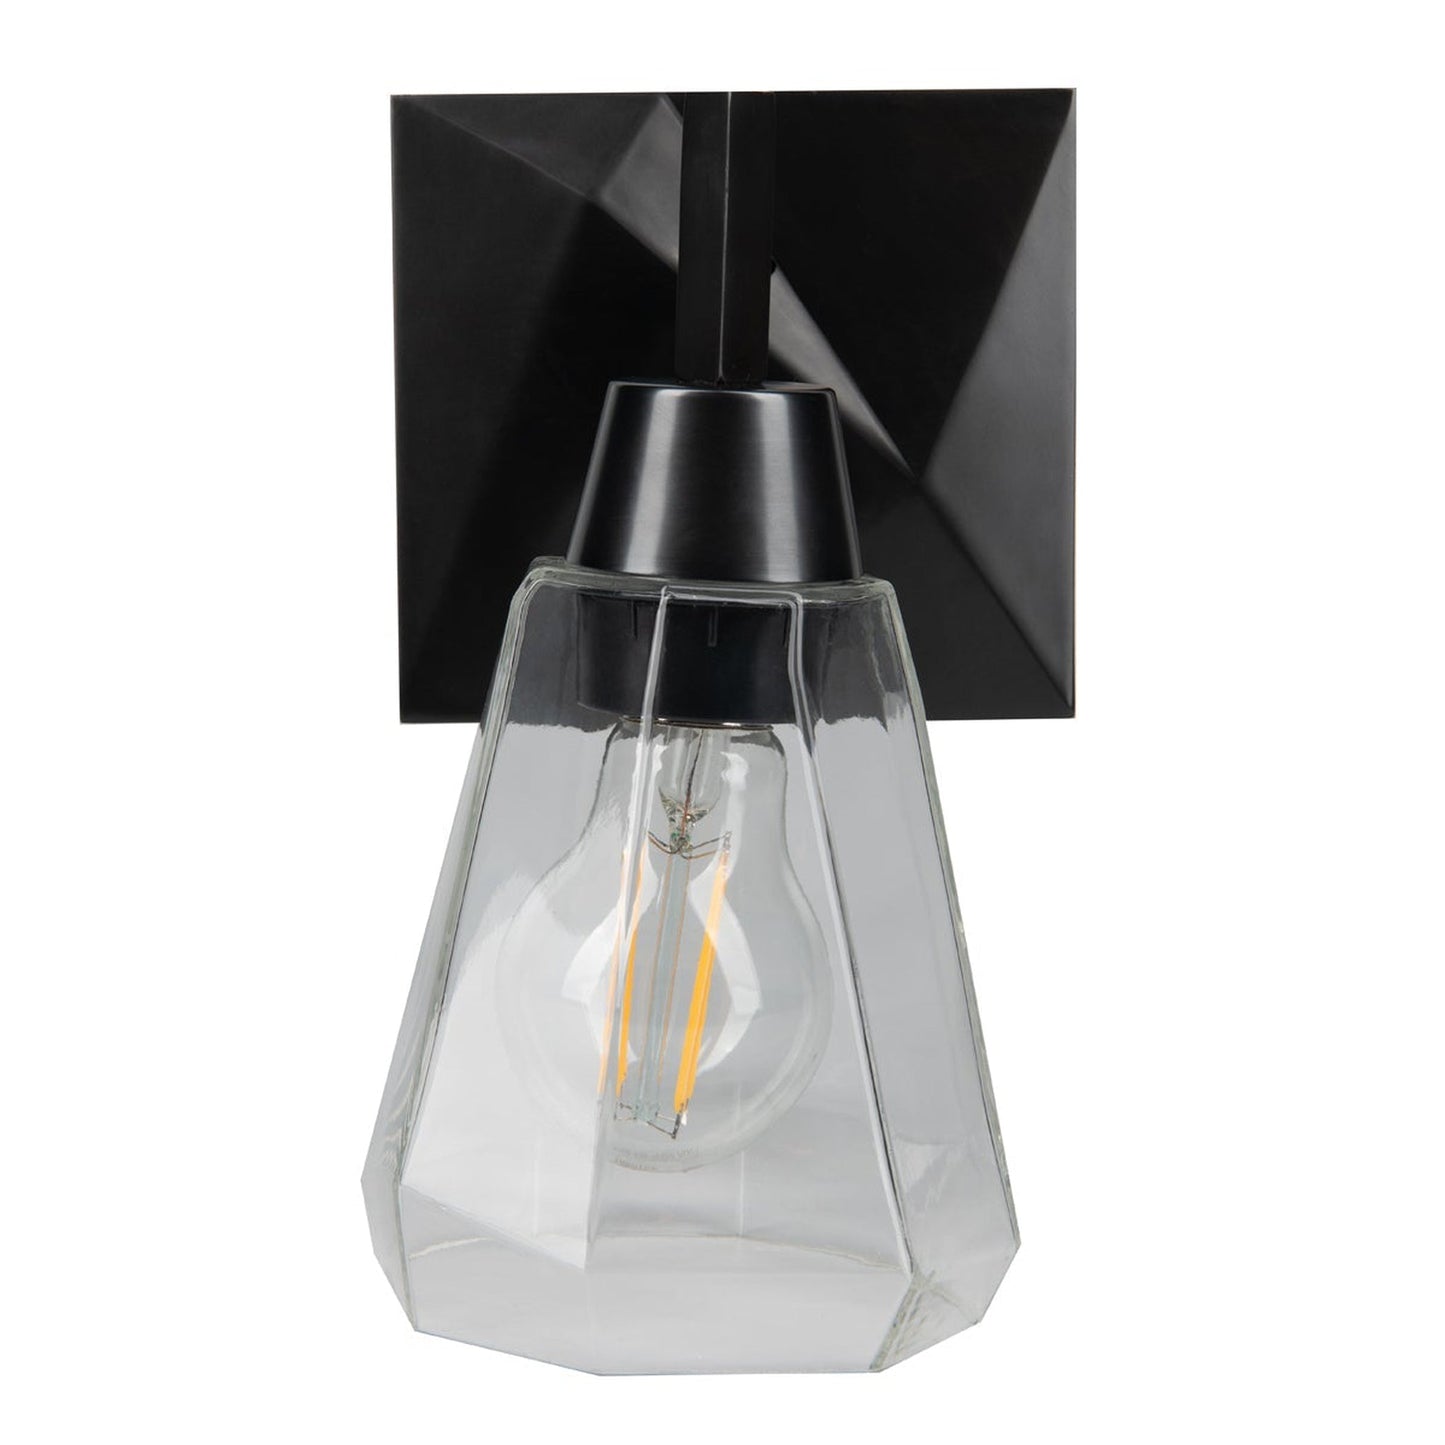 Norwell Lighting Arctic Bath Series 9" x 5" 1-Light Acid Dipped Black Vanity Wall Sconce With Clear Glass Diffuser